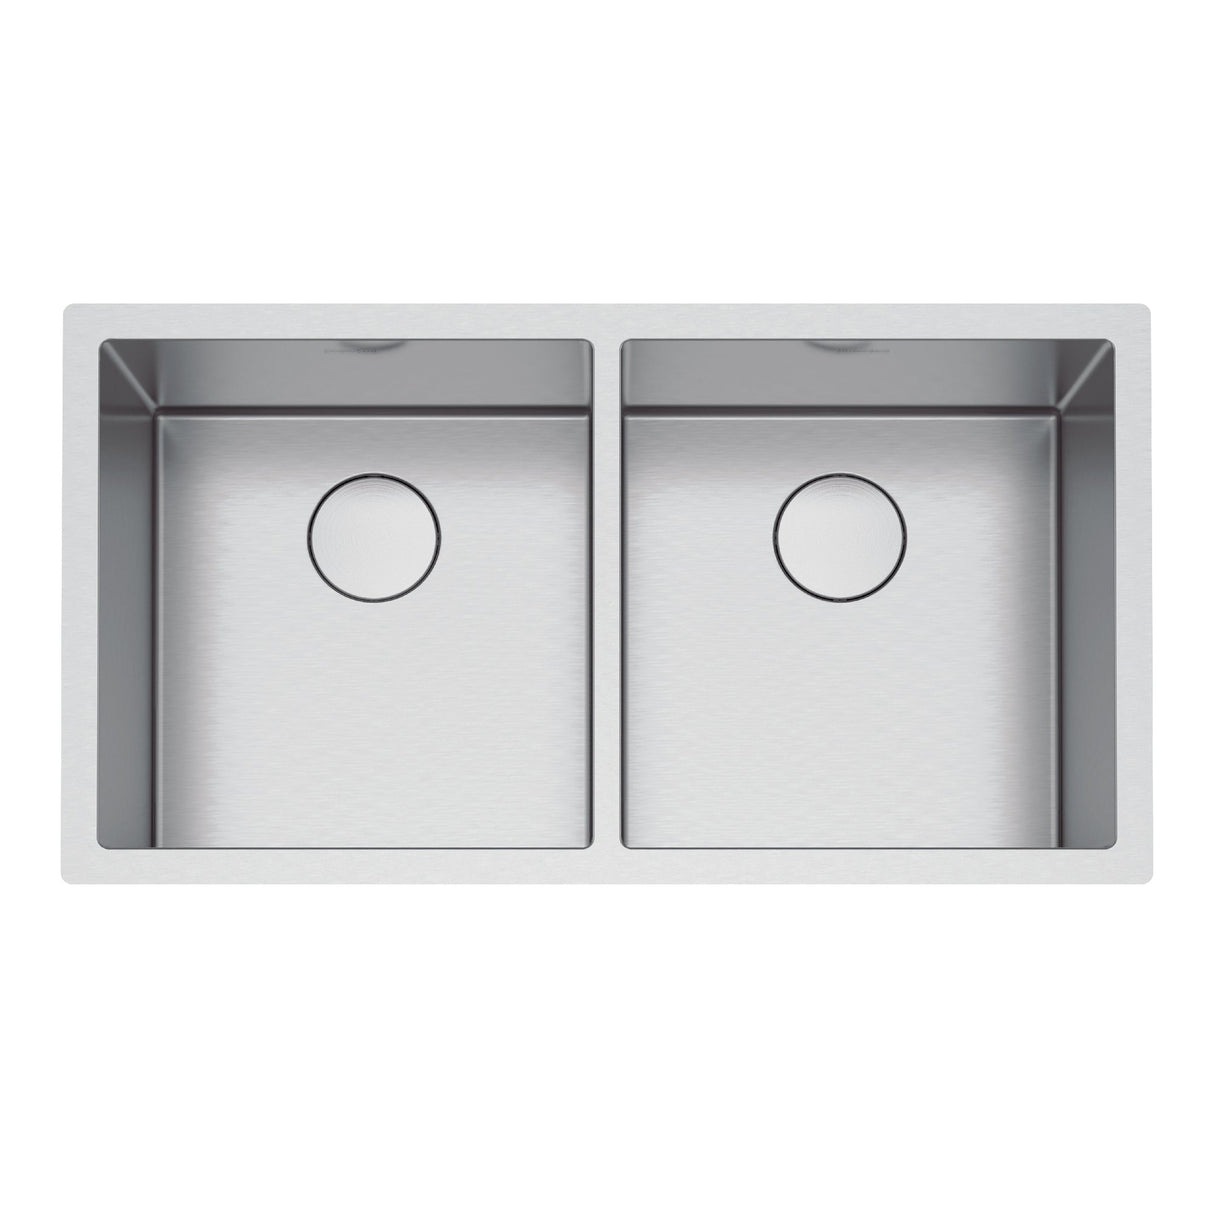 FRANKE PS2X120-16-16 Professional 2.0 35.5-in.. x 19.5-in. 16 Gauge Stainless Steel Undermount Double Bowl Kitchen Sink - PS2X120-16-16 In Diamond